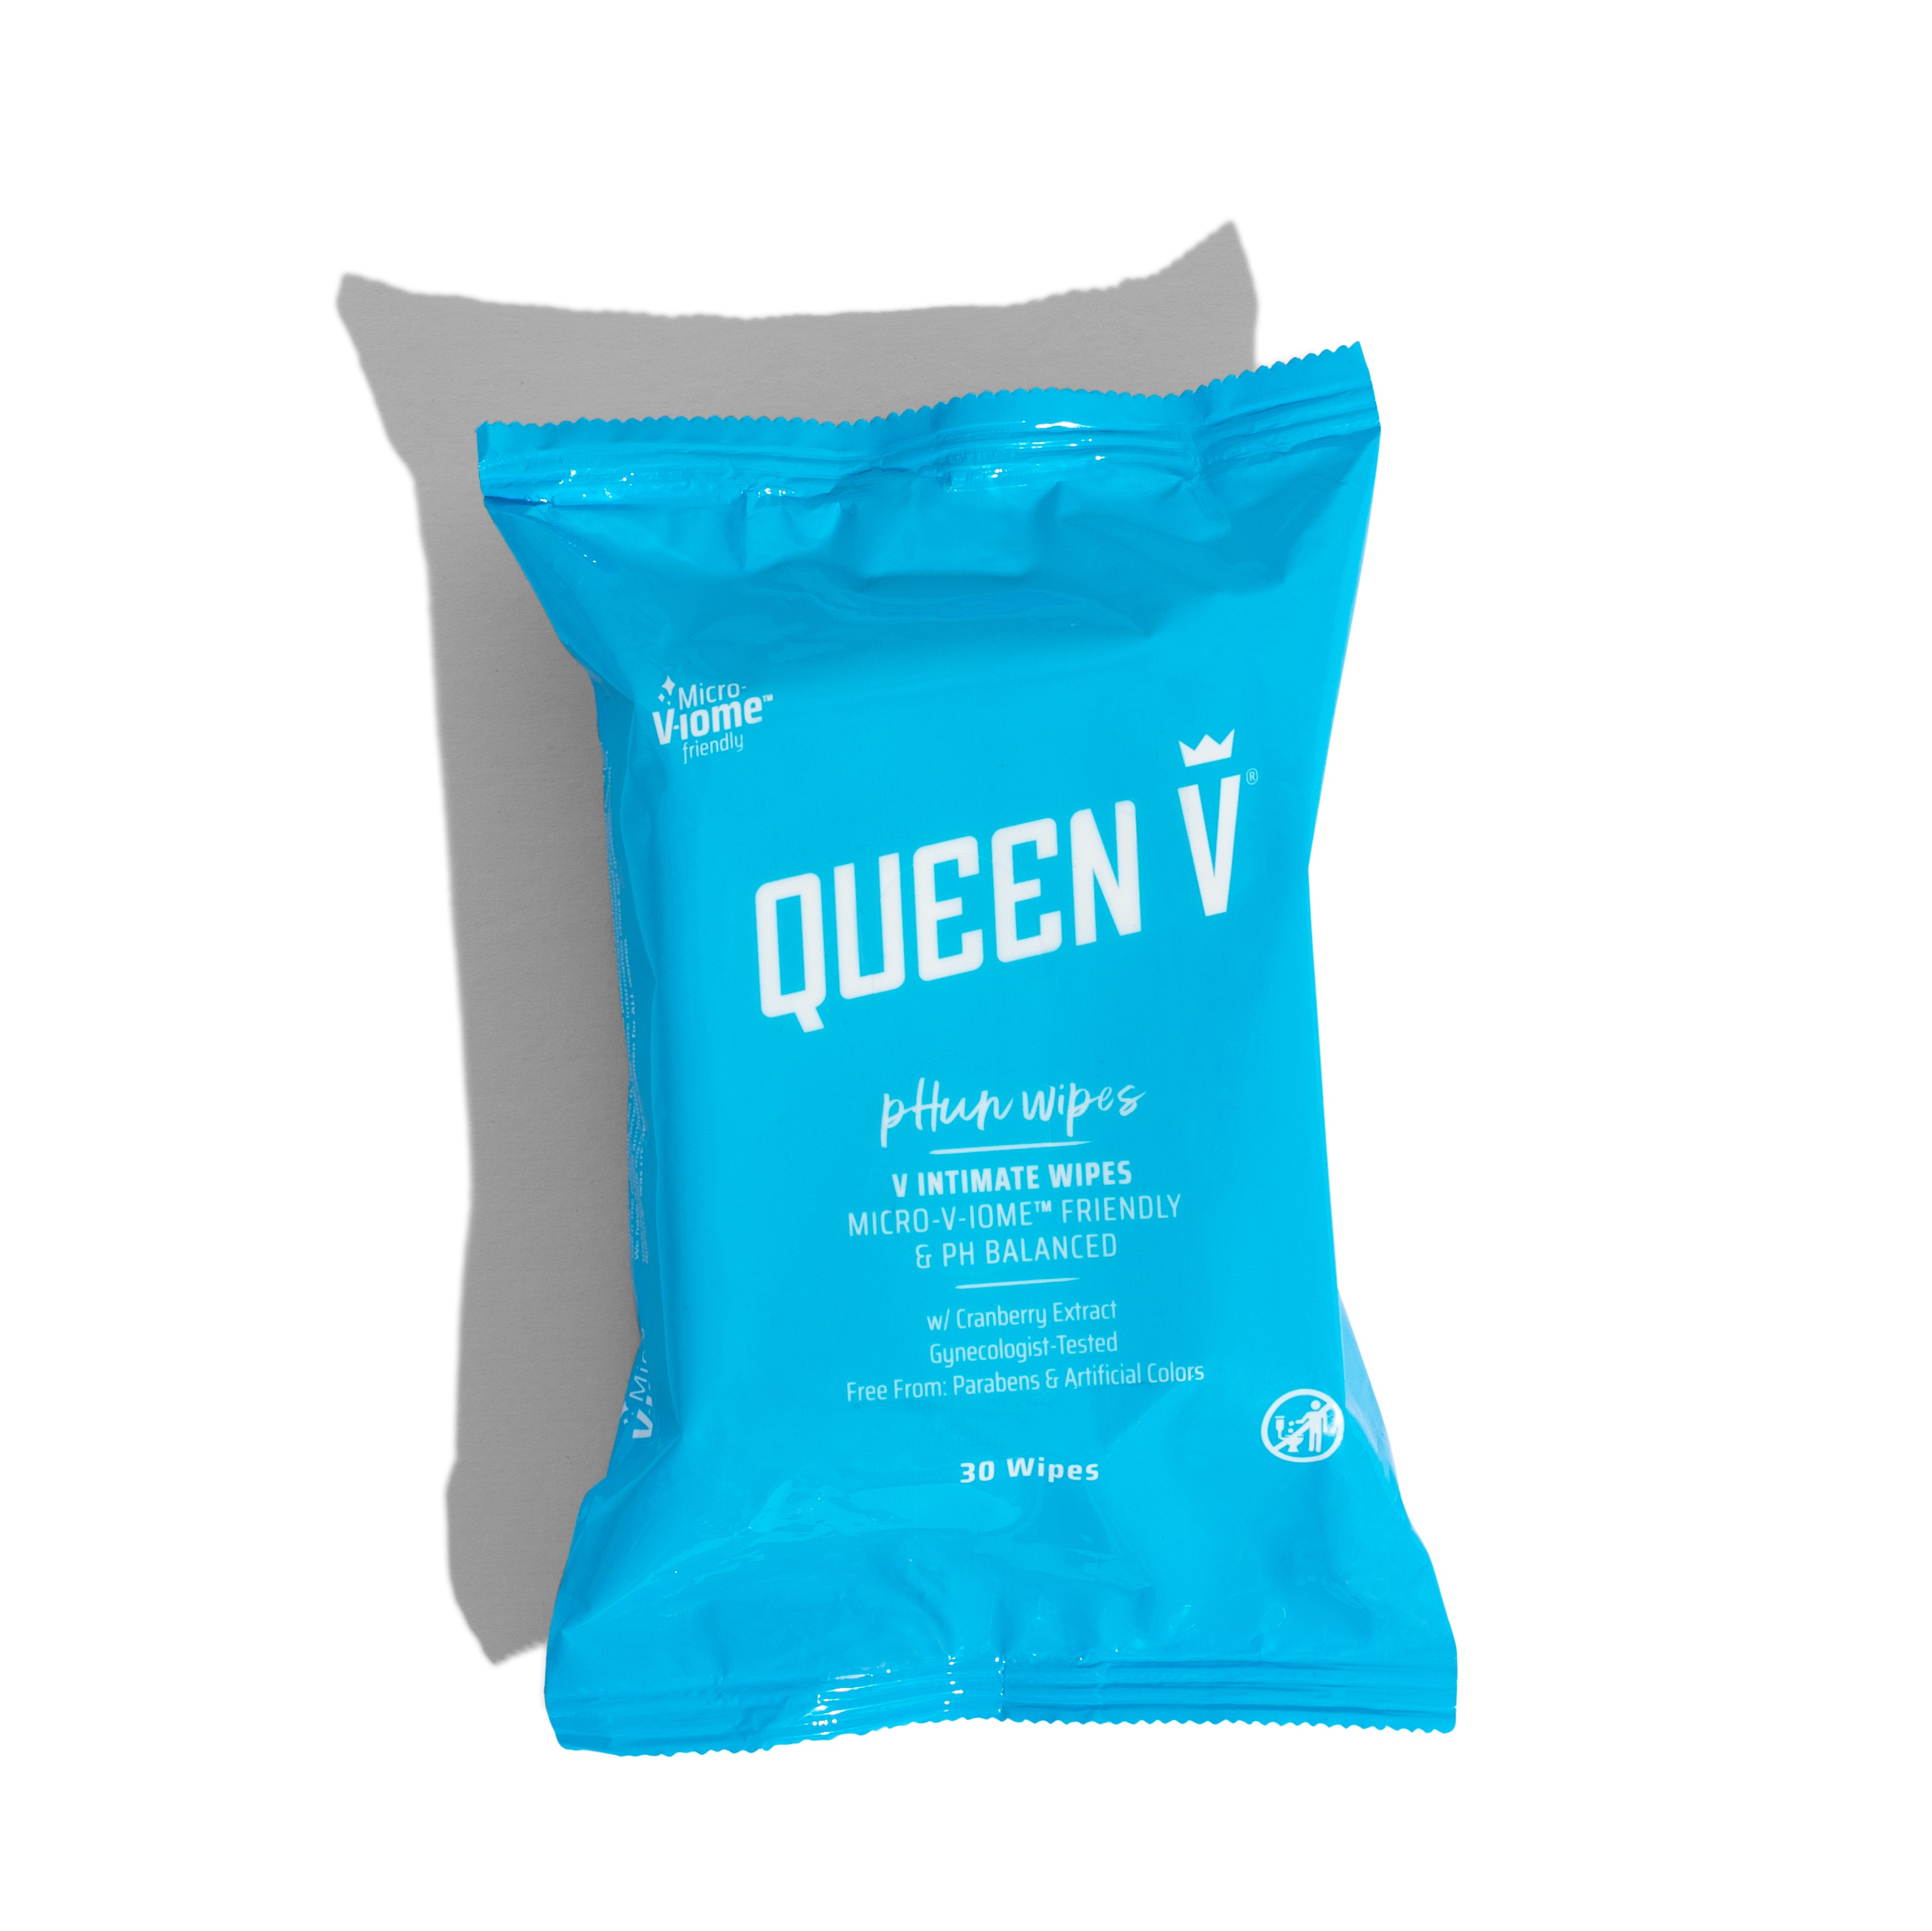 QUEEN V pHun Wipes  Intimate Wipes